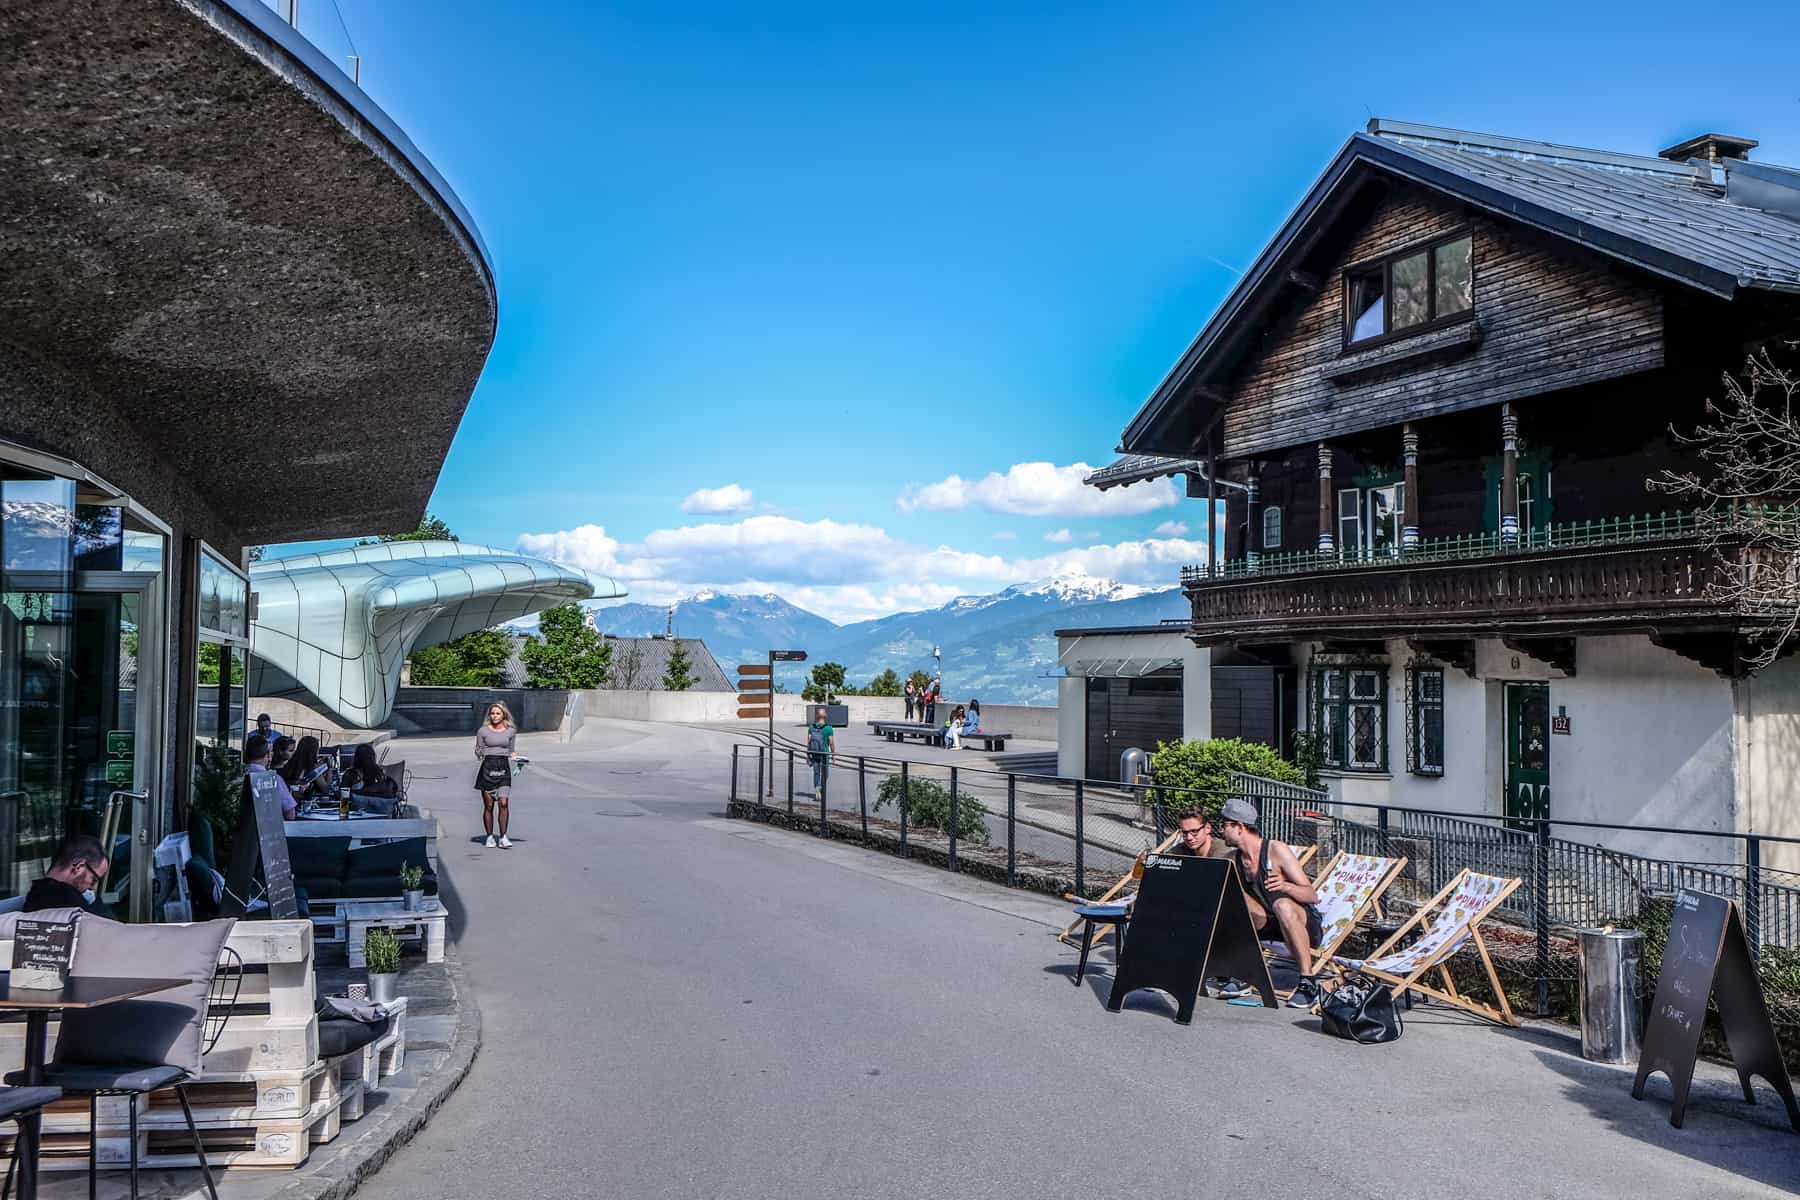 A modern cafe on the right and traditional wooden house on the left on the first level of the Nordkette Mountain in Innsbruck, Austria